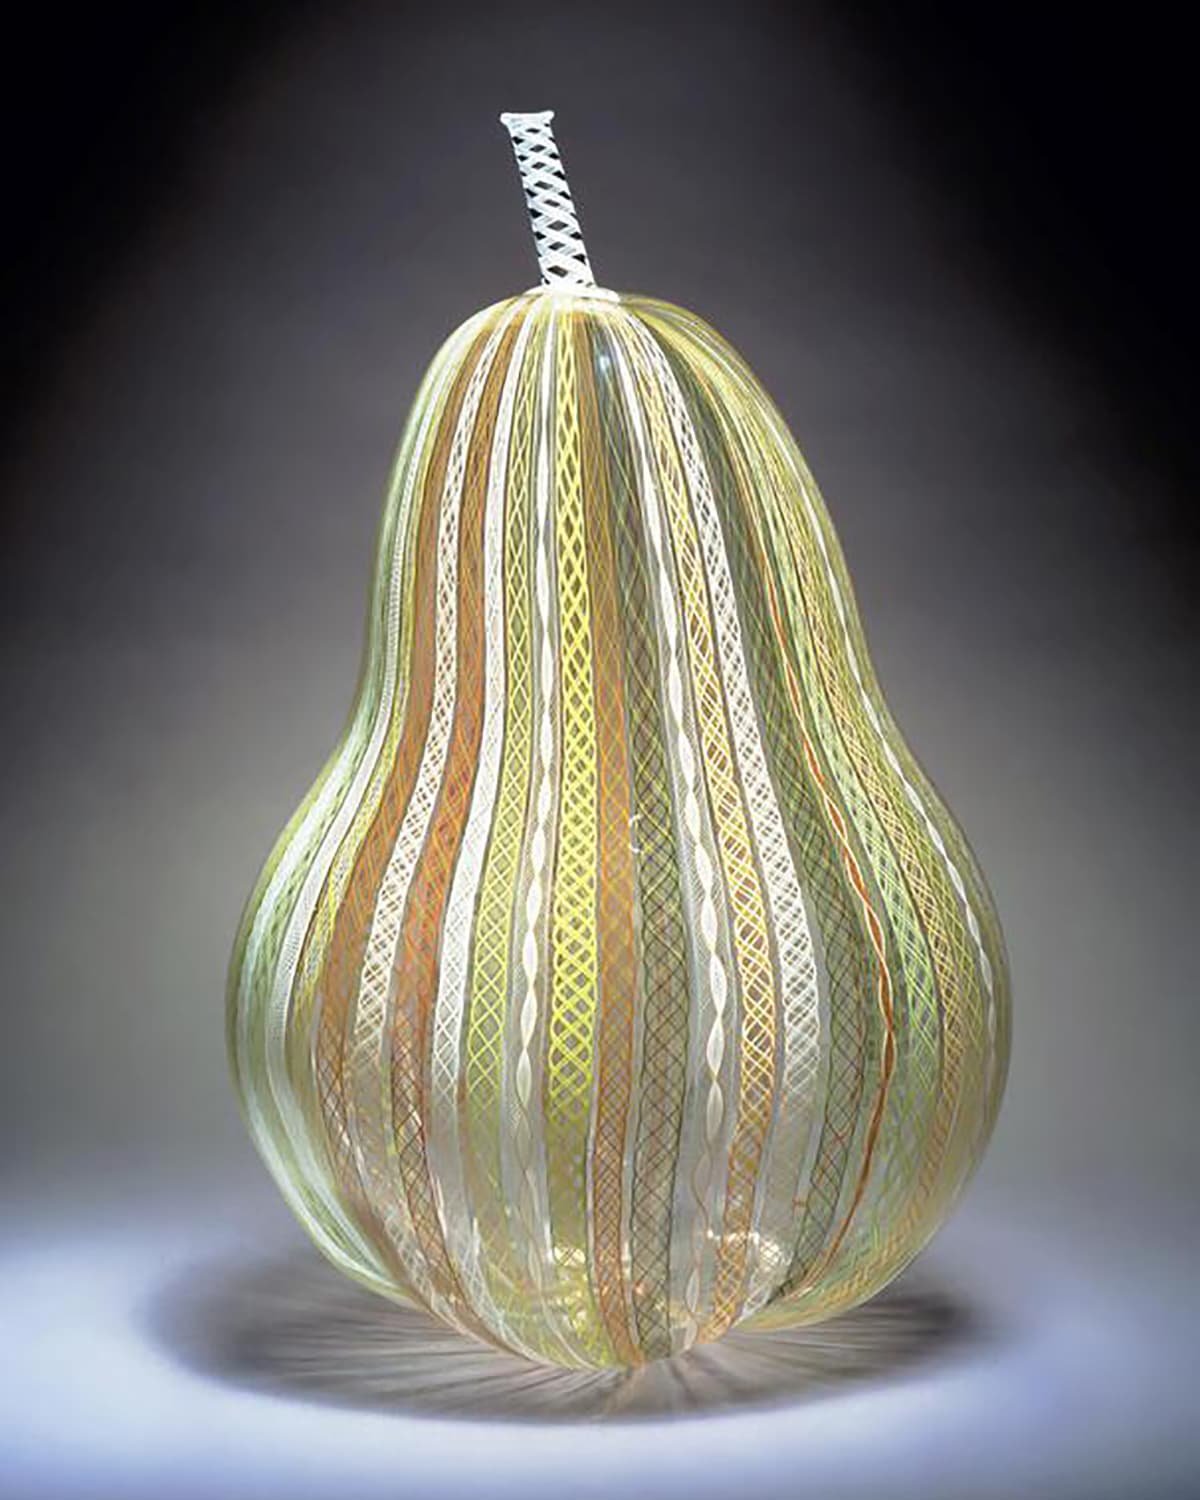 Studio image of a glass sculpture that is in the shape of a pear.